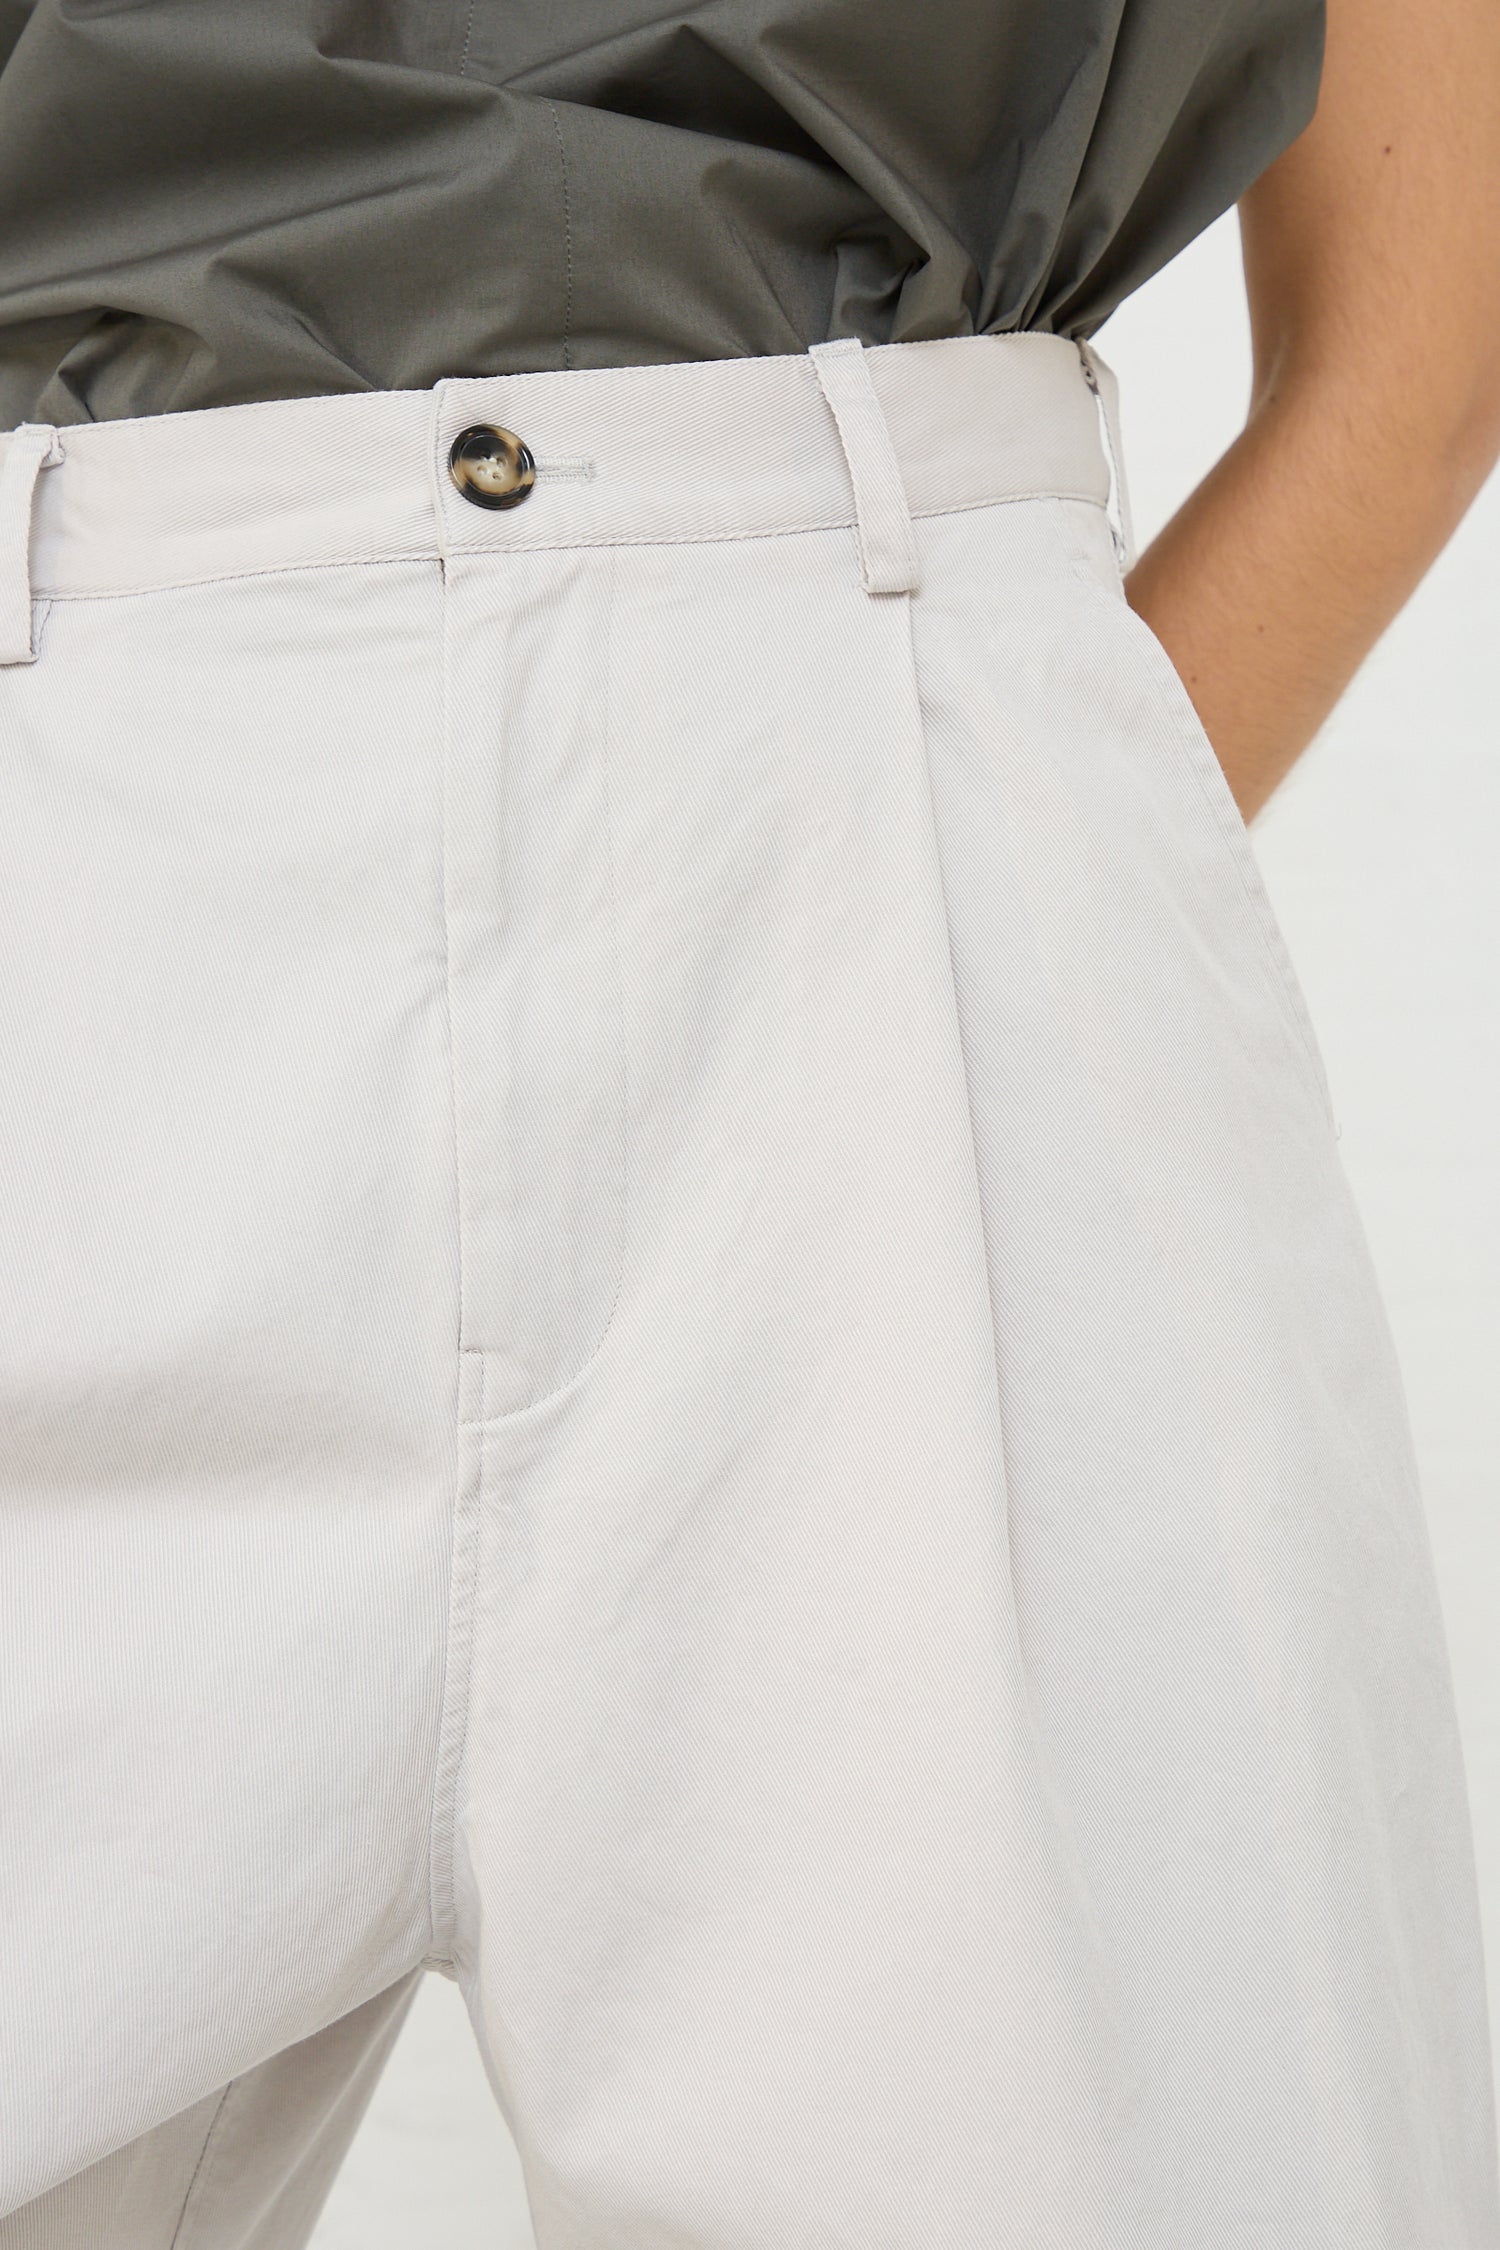 The back of a woman wearing a white shirt and low-rise pants in Sofie D'Hoore's Cotton Twill Proof Pant in Mastic.